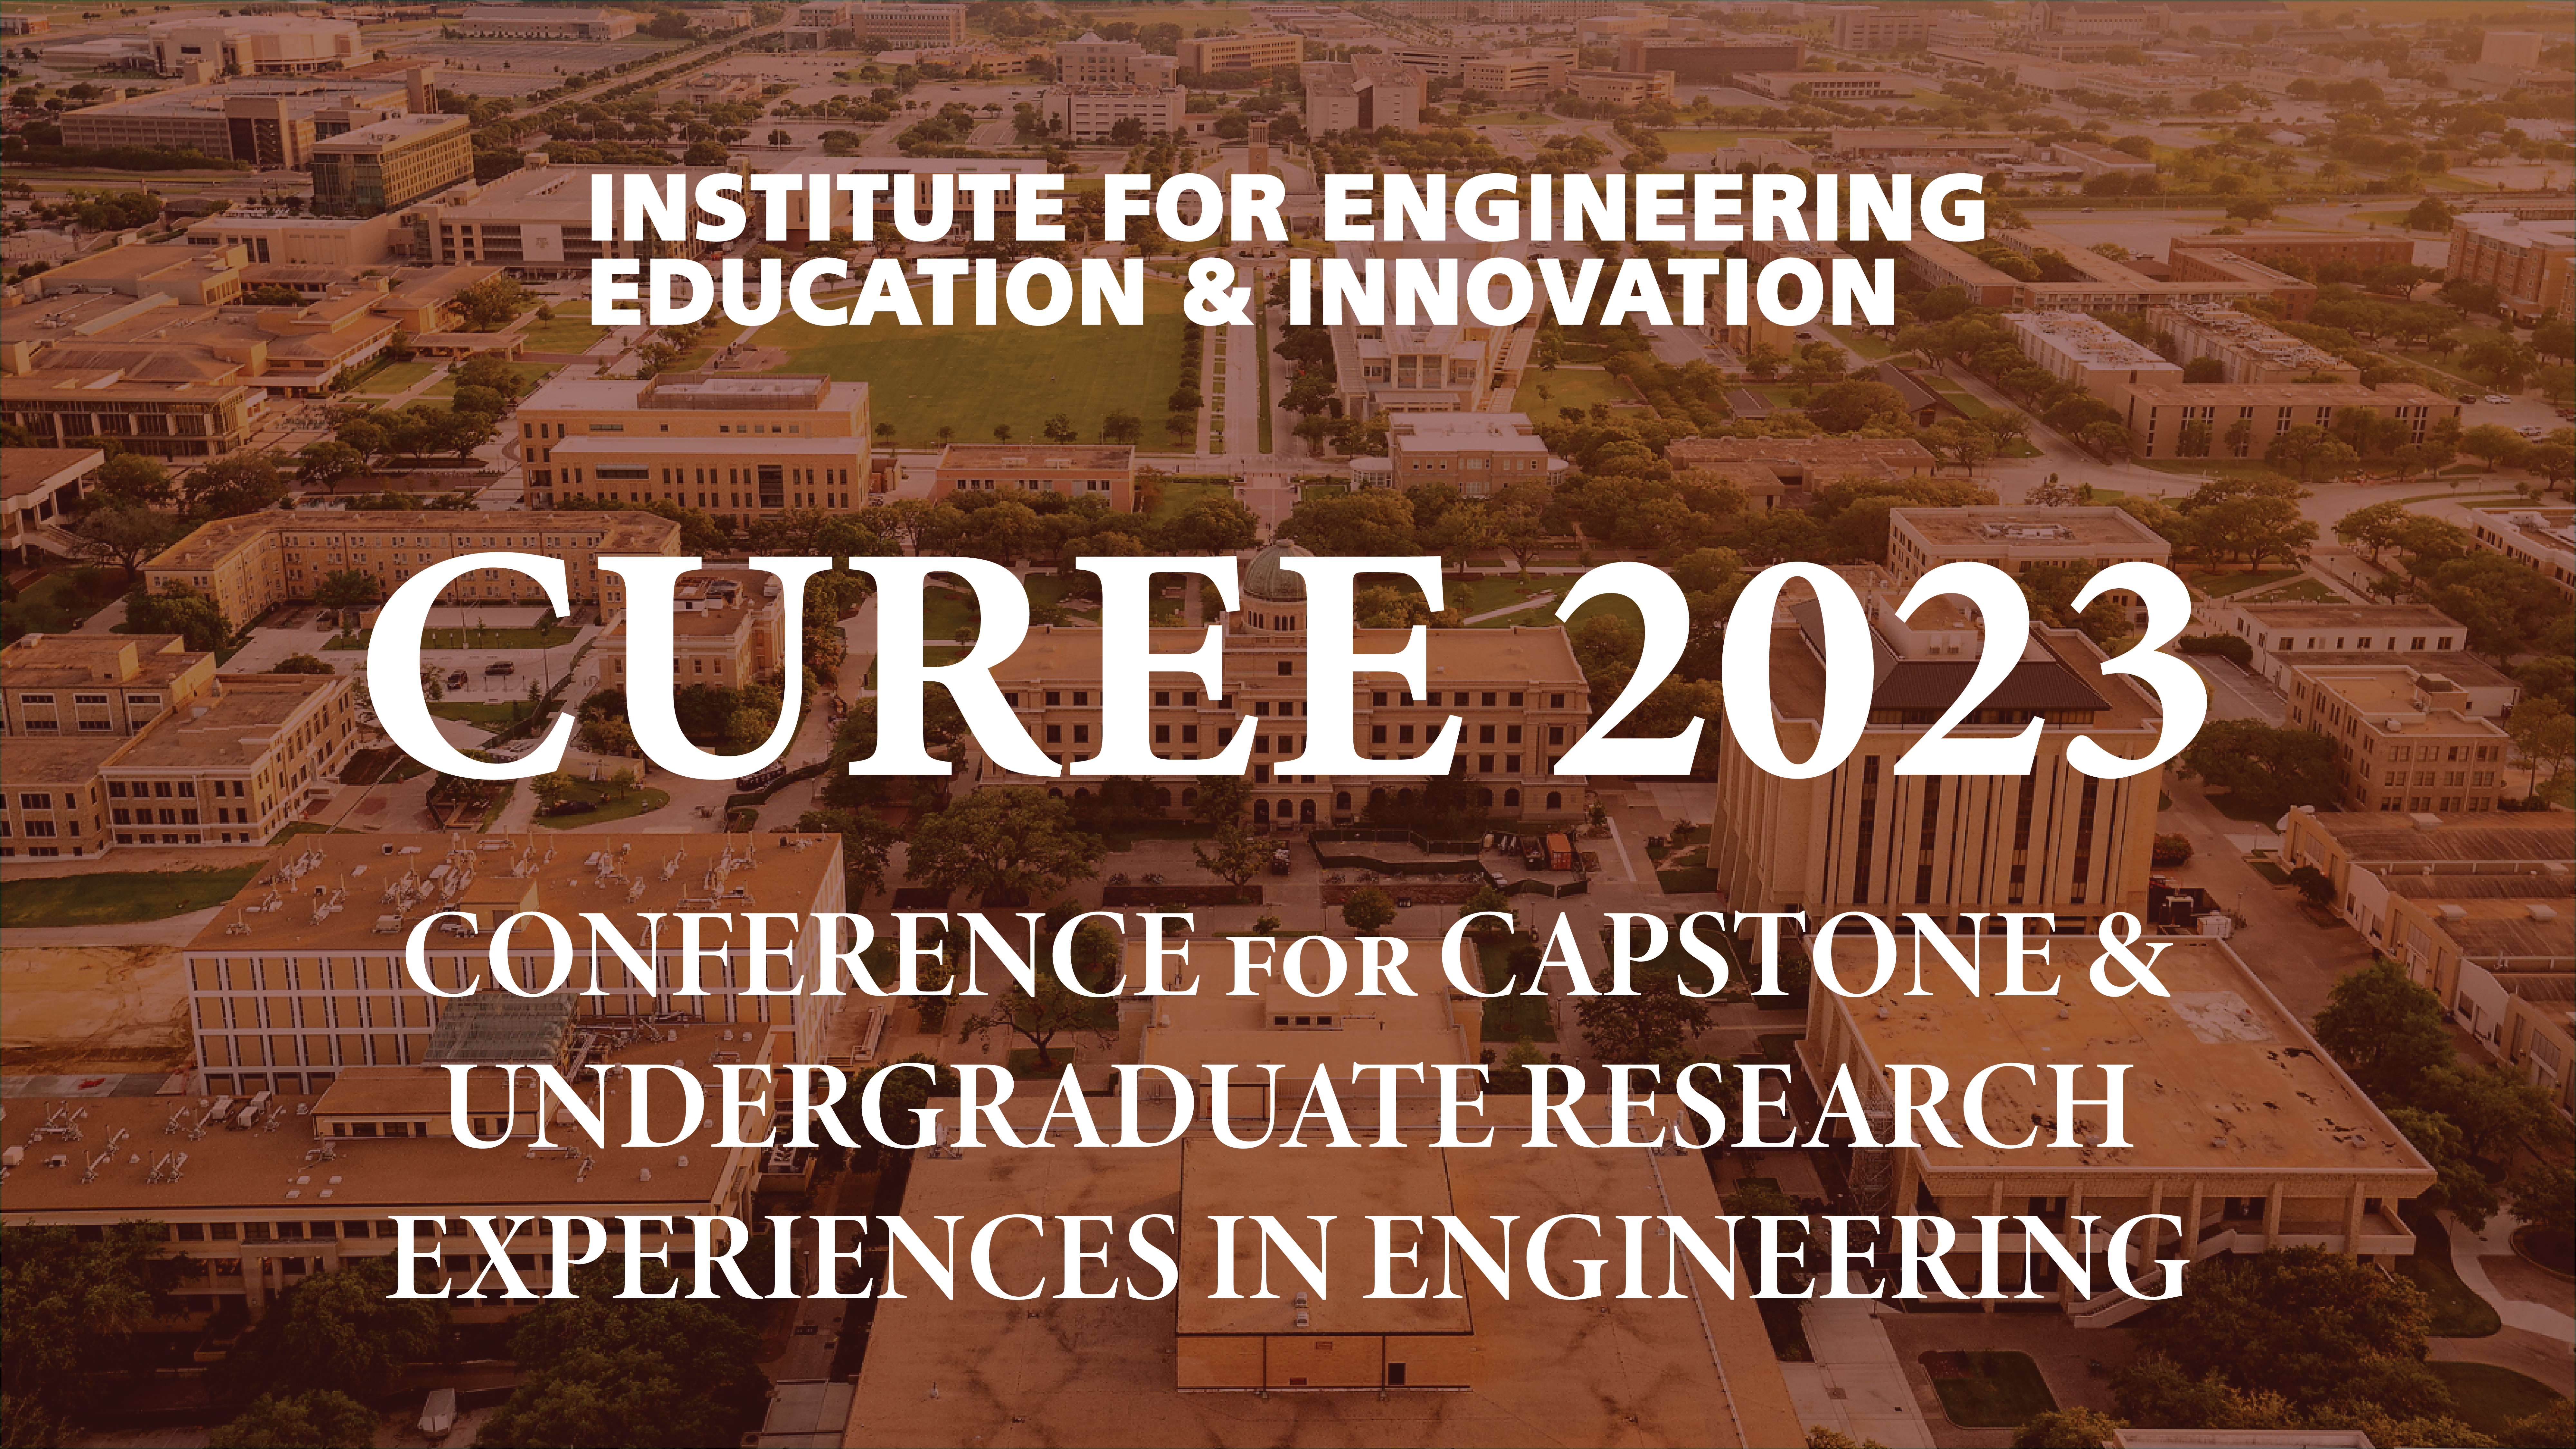 Capstone & Undergraduate Research Experiences in Engineering (CUREE) Conference